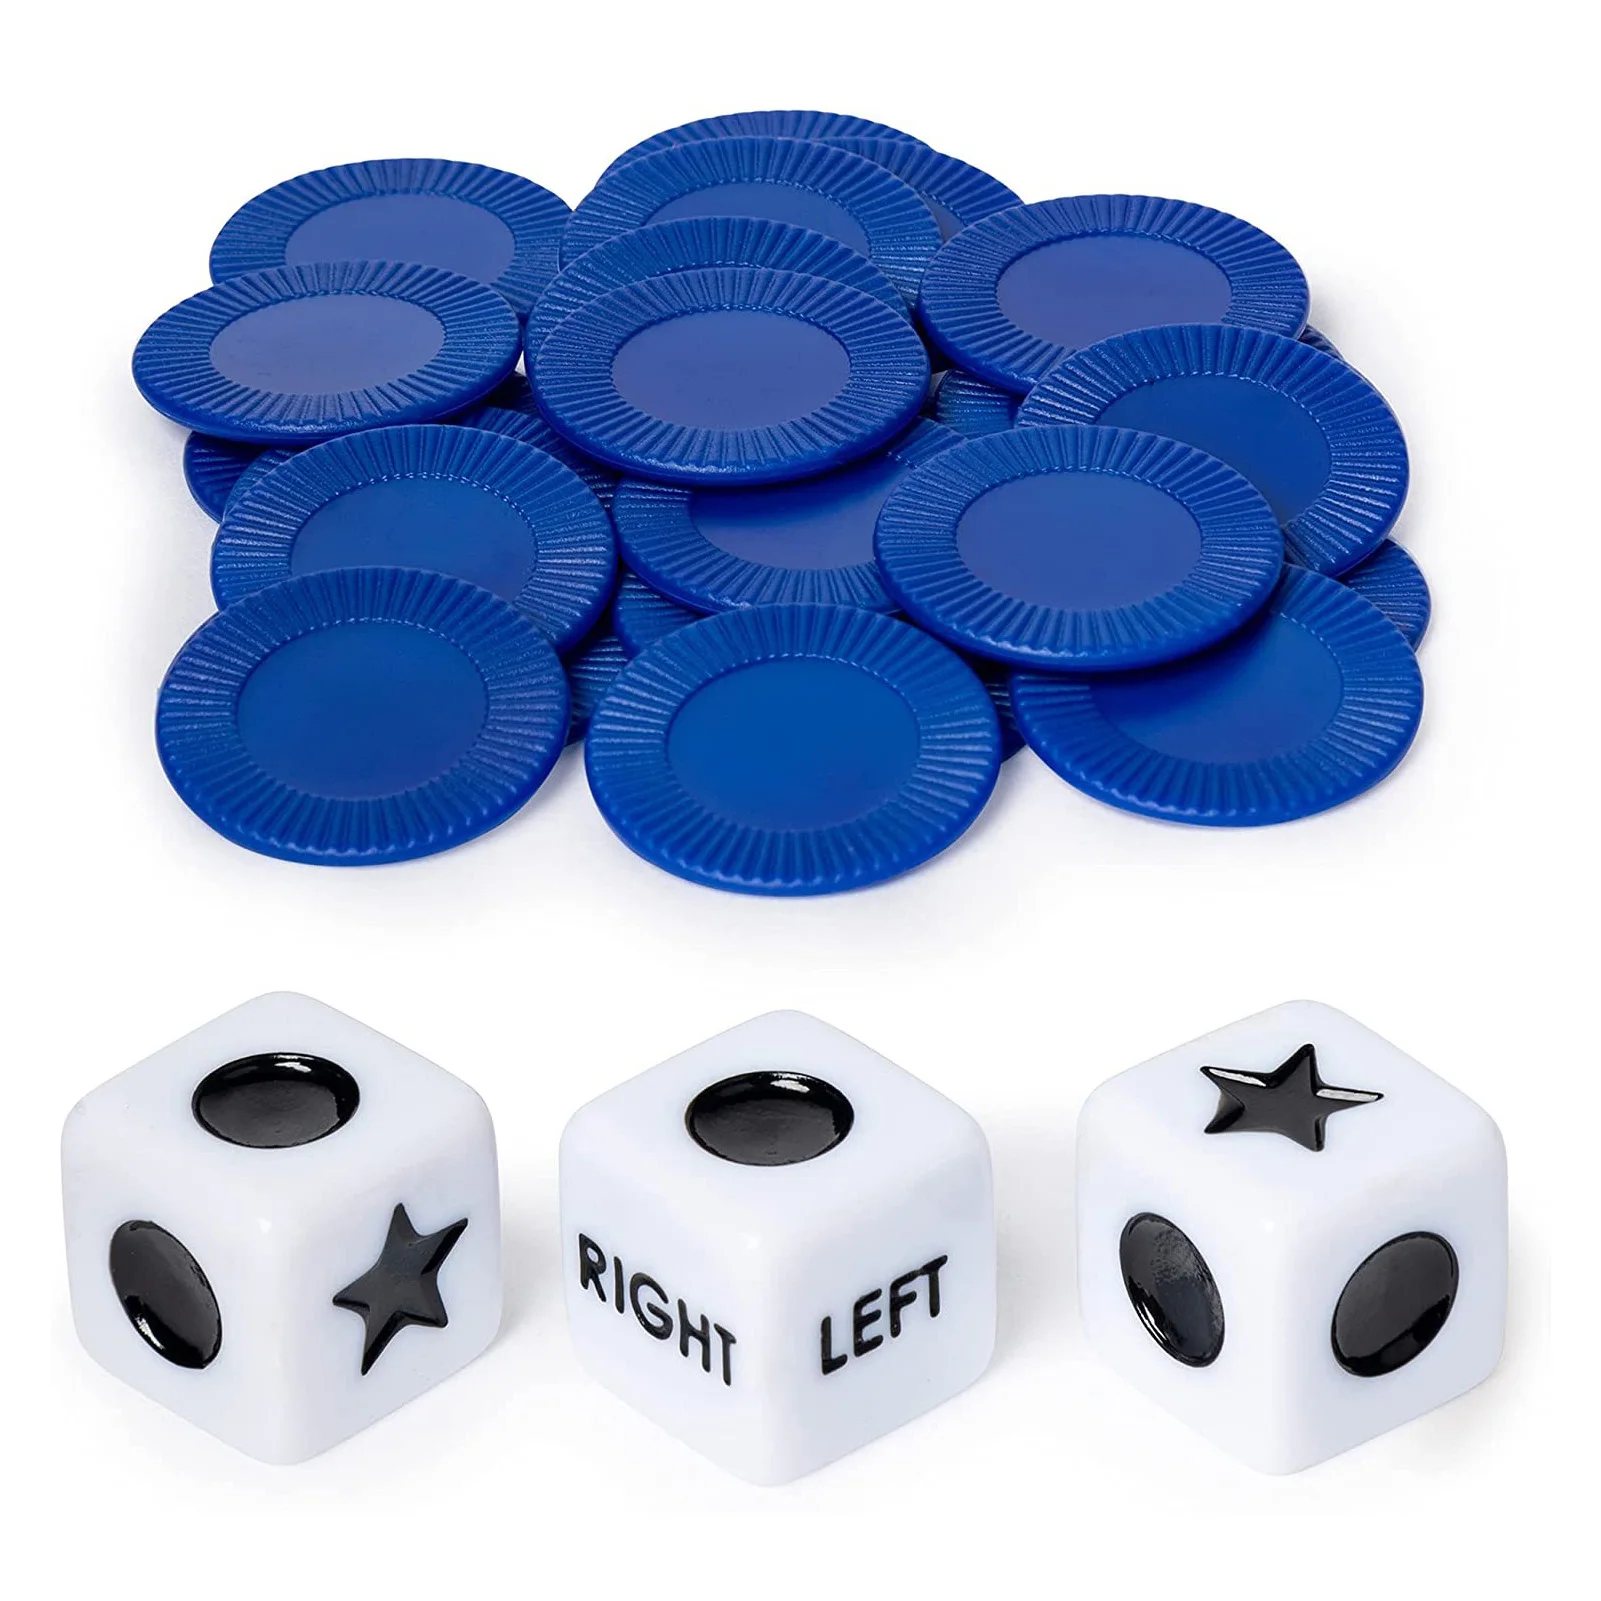 Left Right Center Dice Game Innovative Left Right Center Table Game With 3 Dices And 24 Random Color Chips For Family Nights